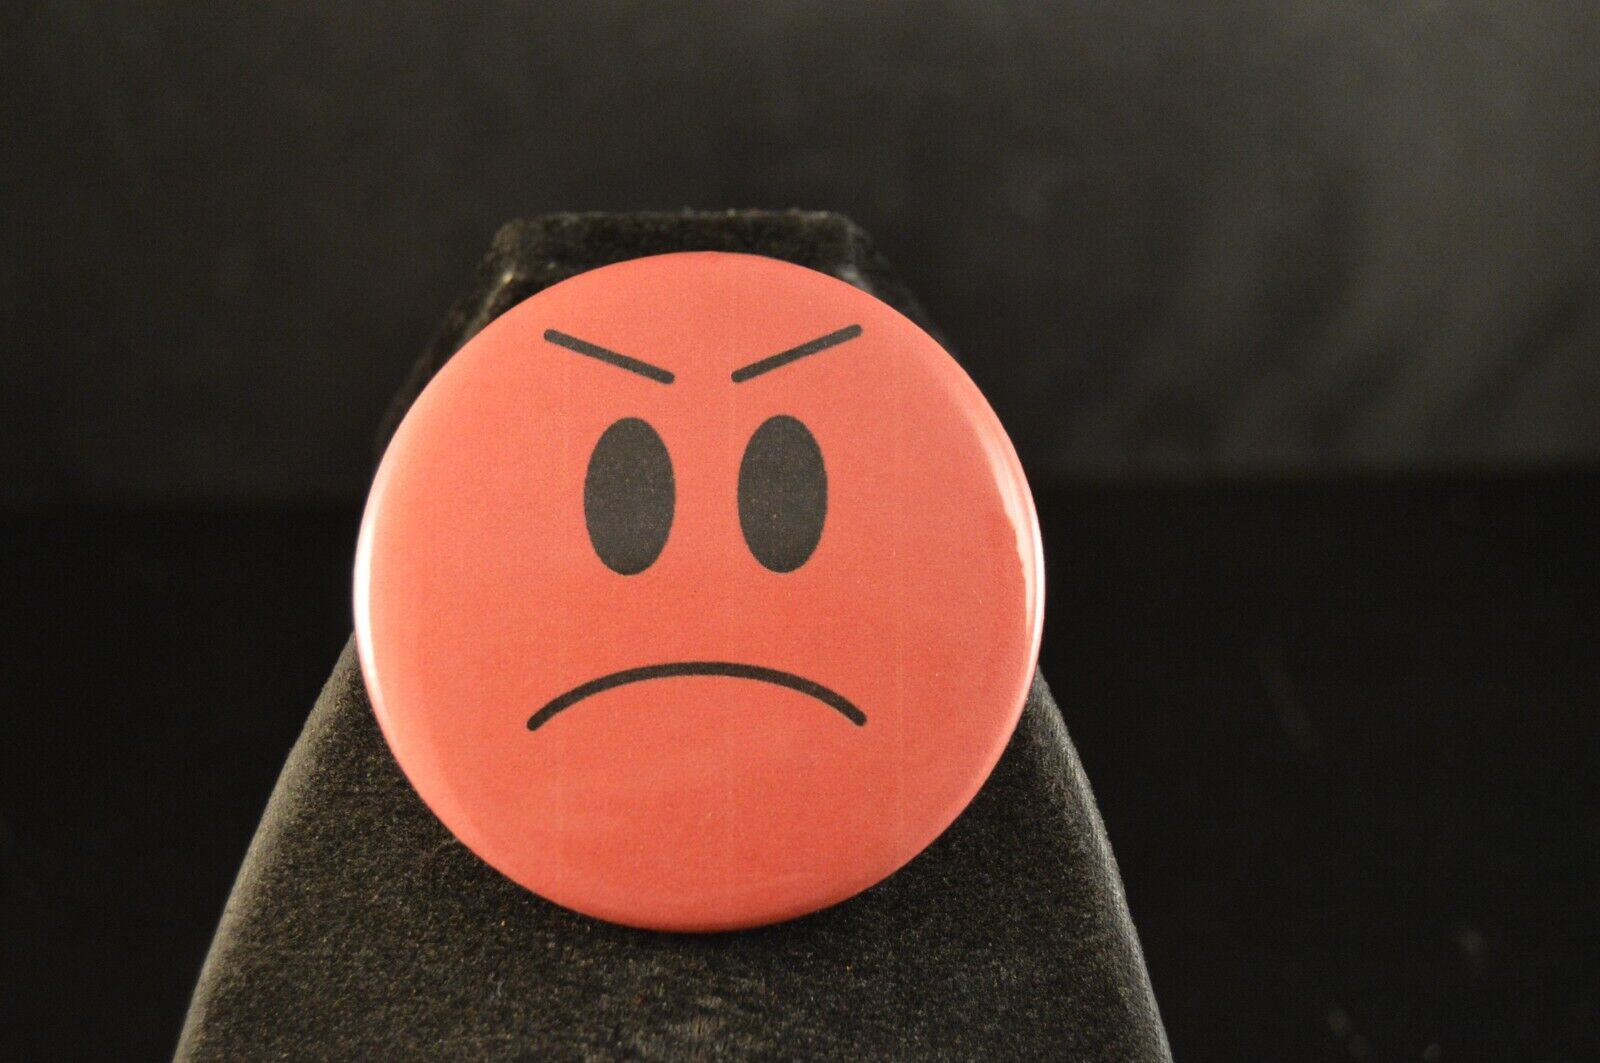 Lot of 100 ANGRY  SAD EMOJI FACE BUTTONS 2 1/4\